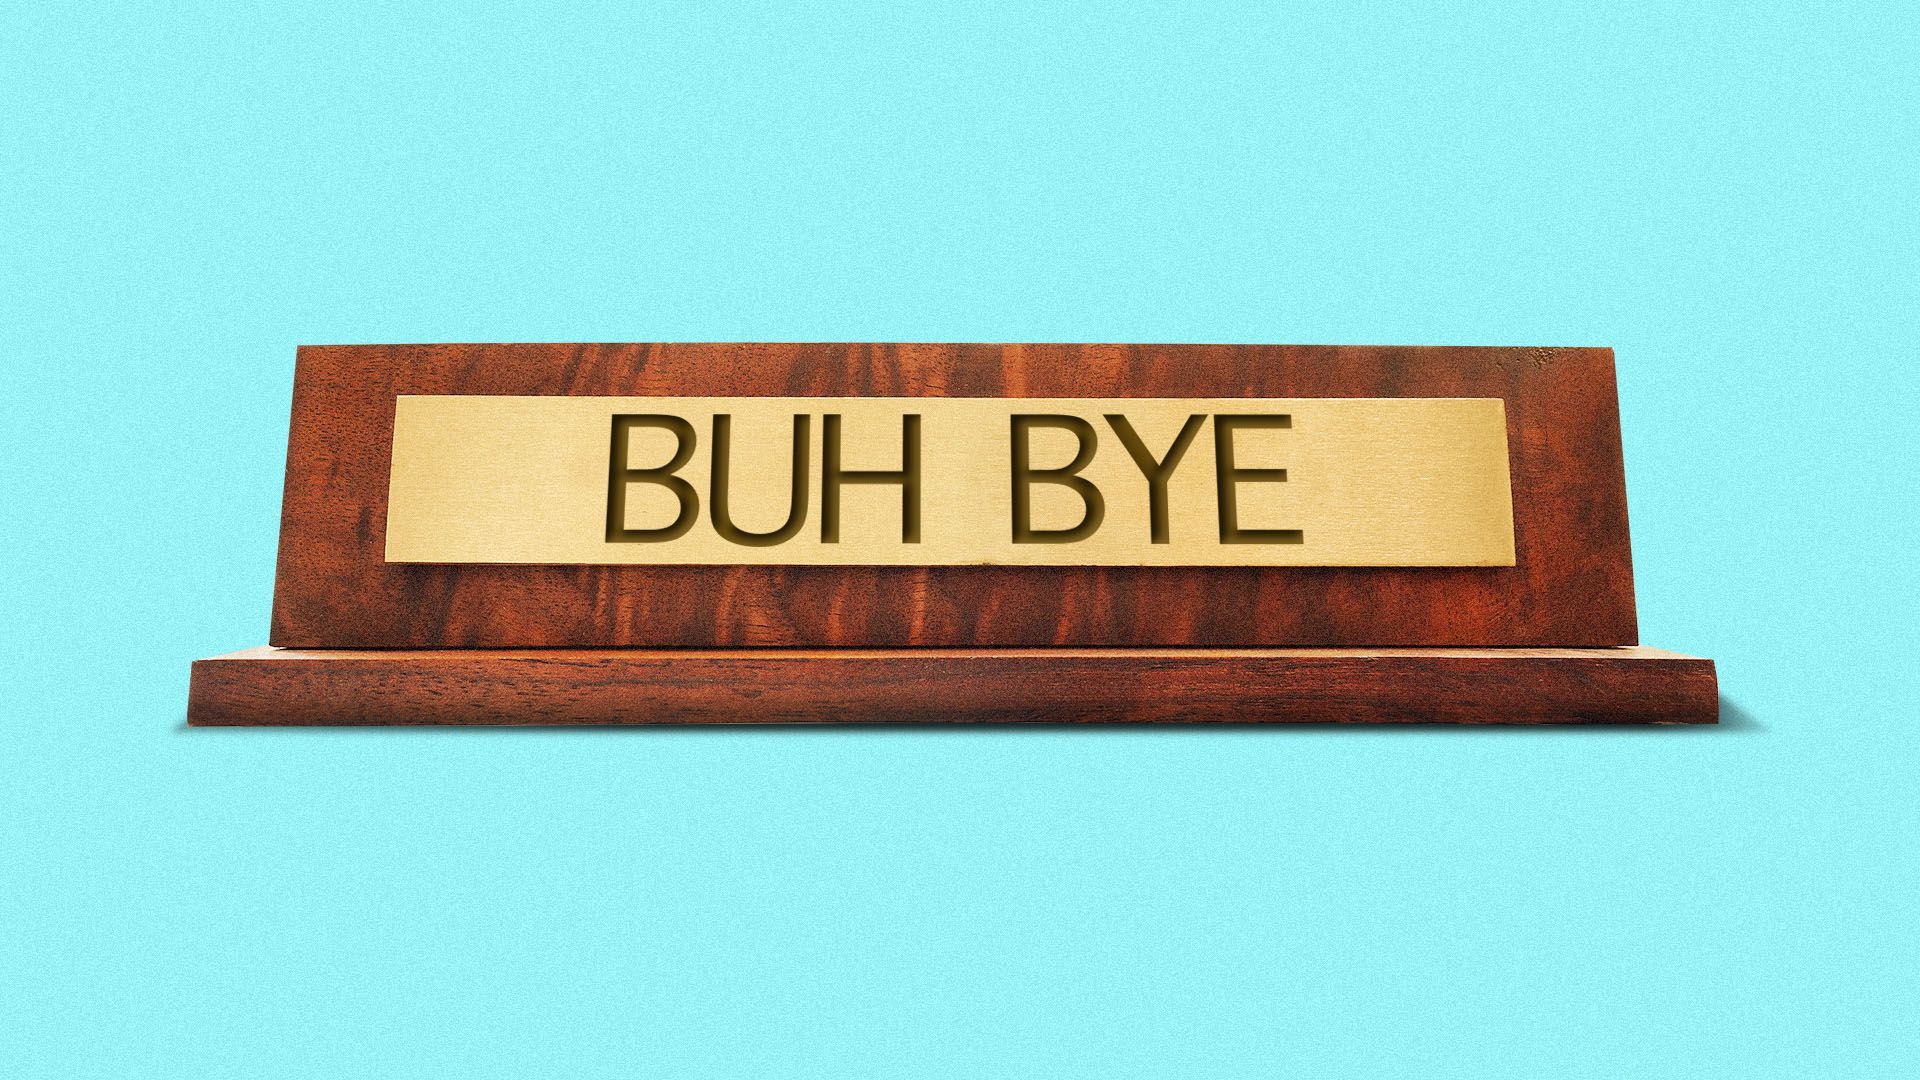 Illustration of a nameplate that reads "buh bye"